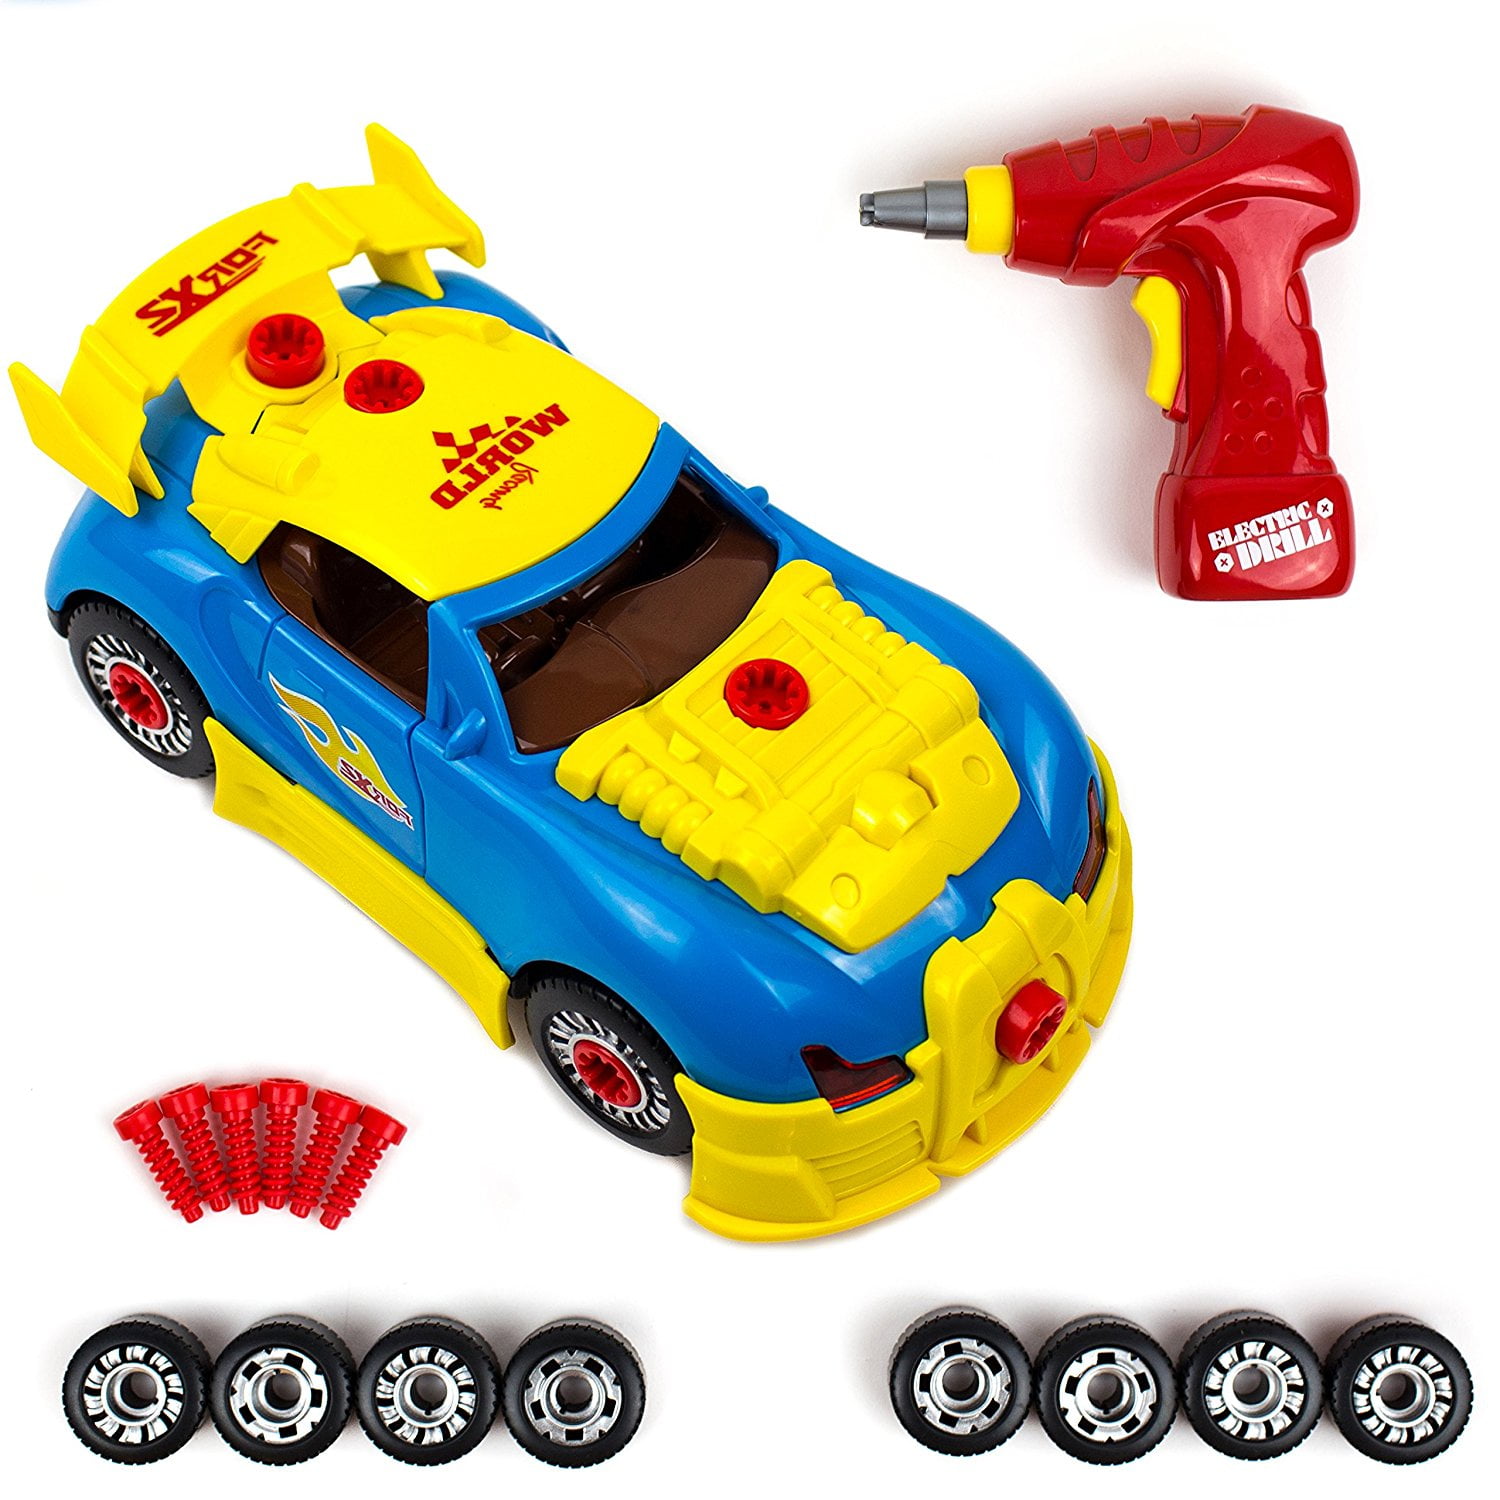 Details about   2 in 1 Take Apart Construction Toy Kit Build Your Own Racing Car Kit with Sounds 